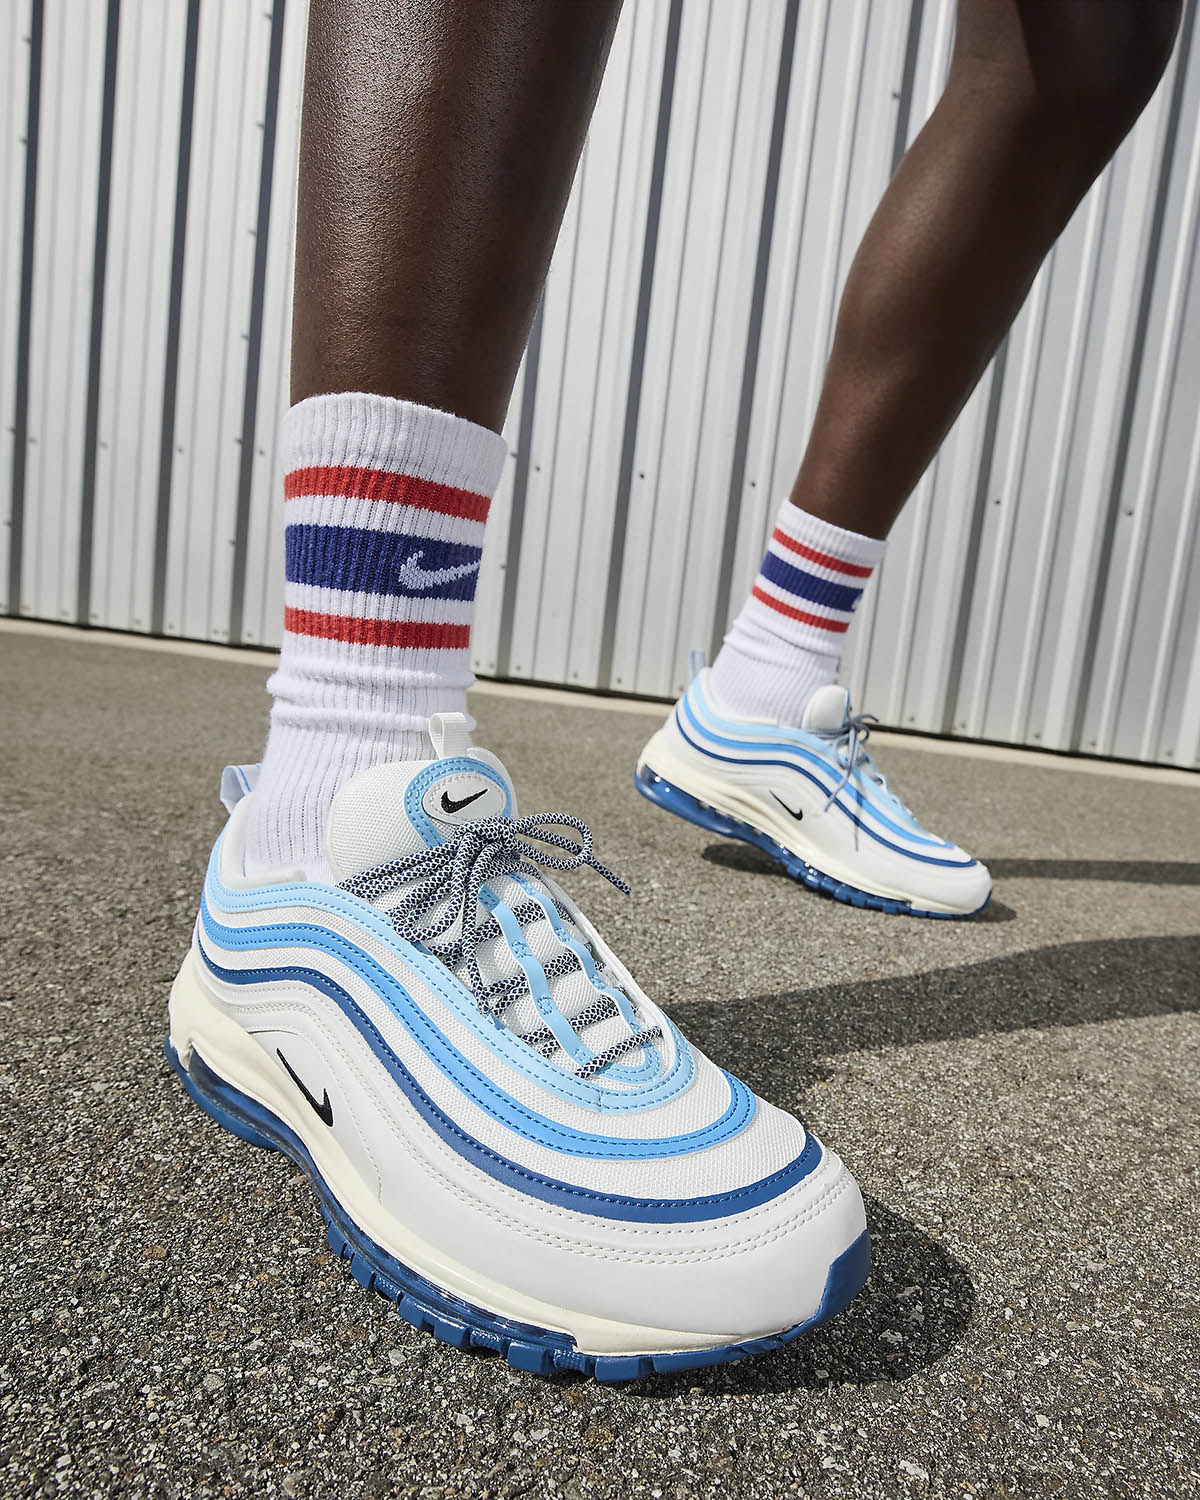 Nike Air Max 97 Summit White Court Blue Light Photo Blue Sneakers On Feet